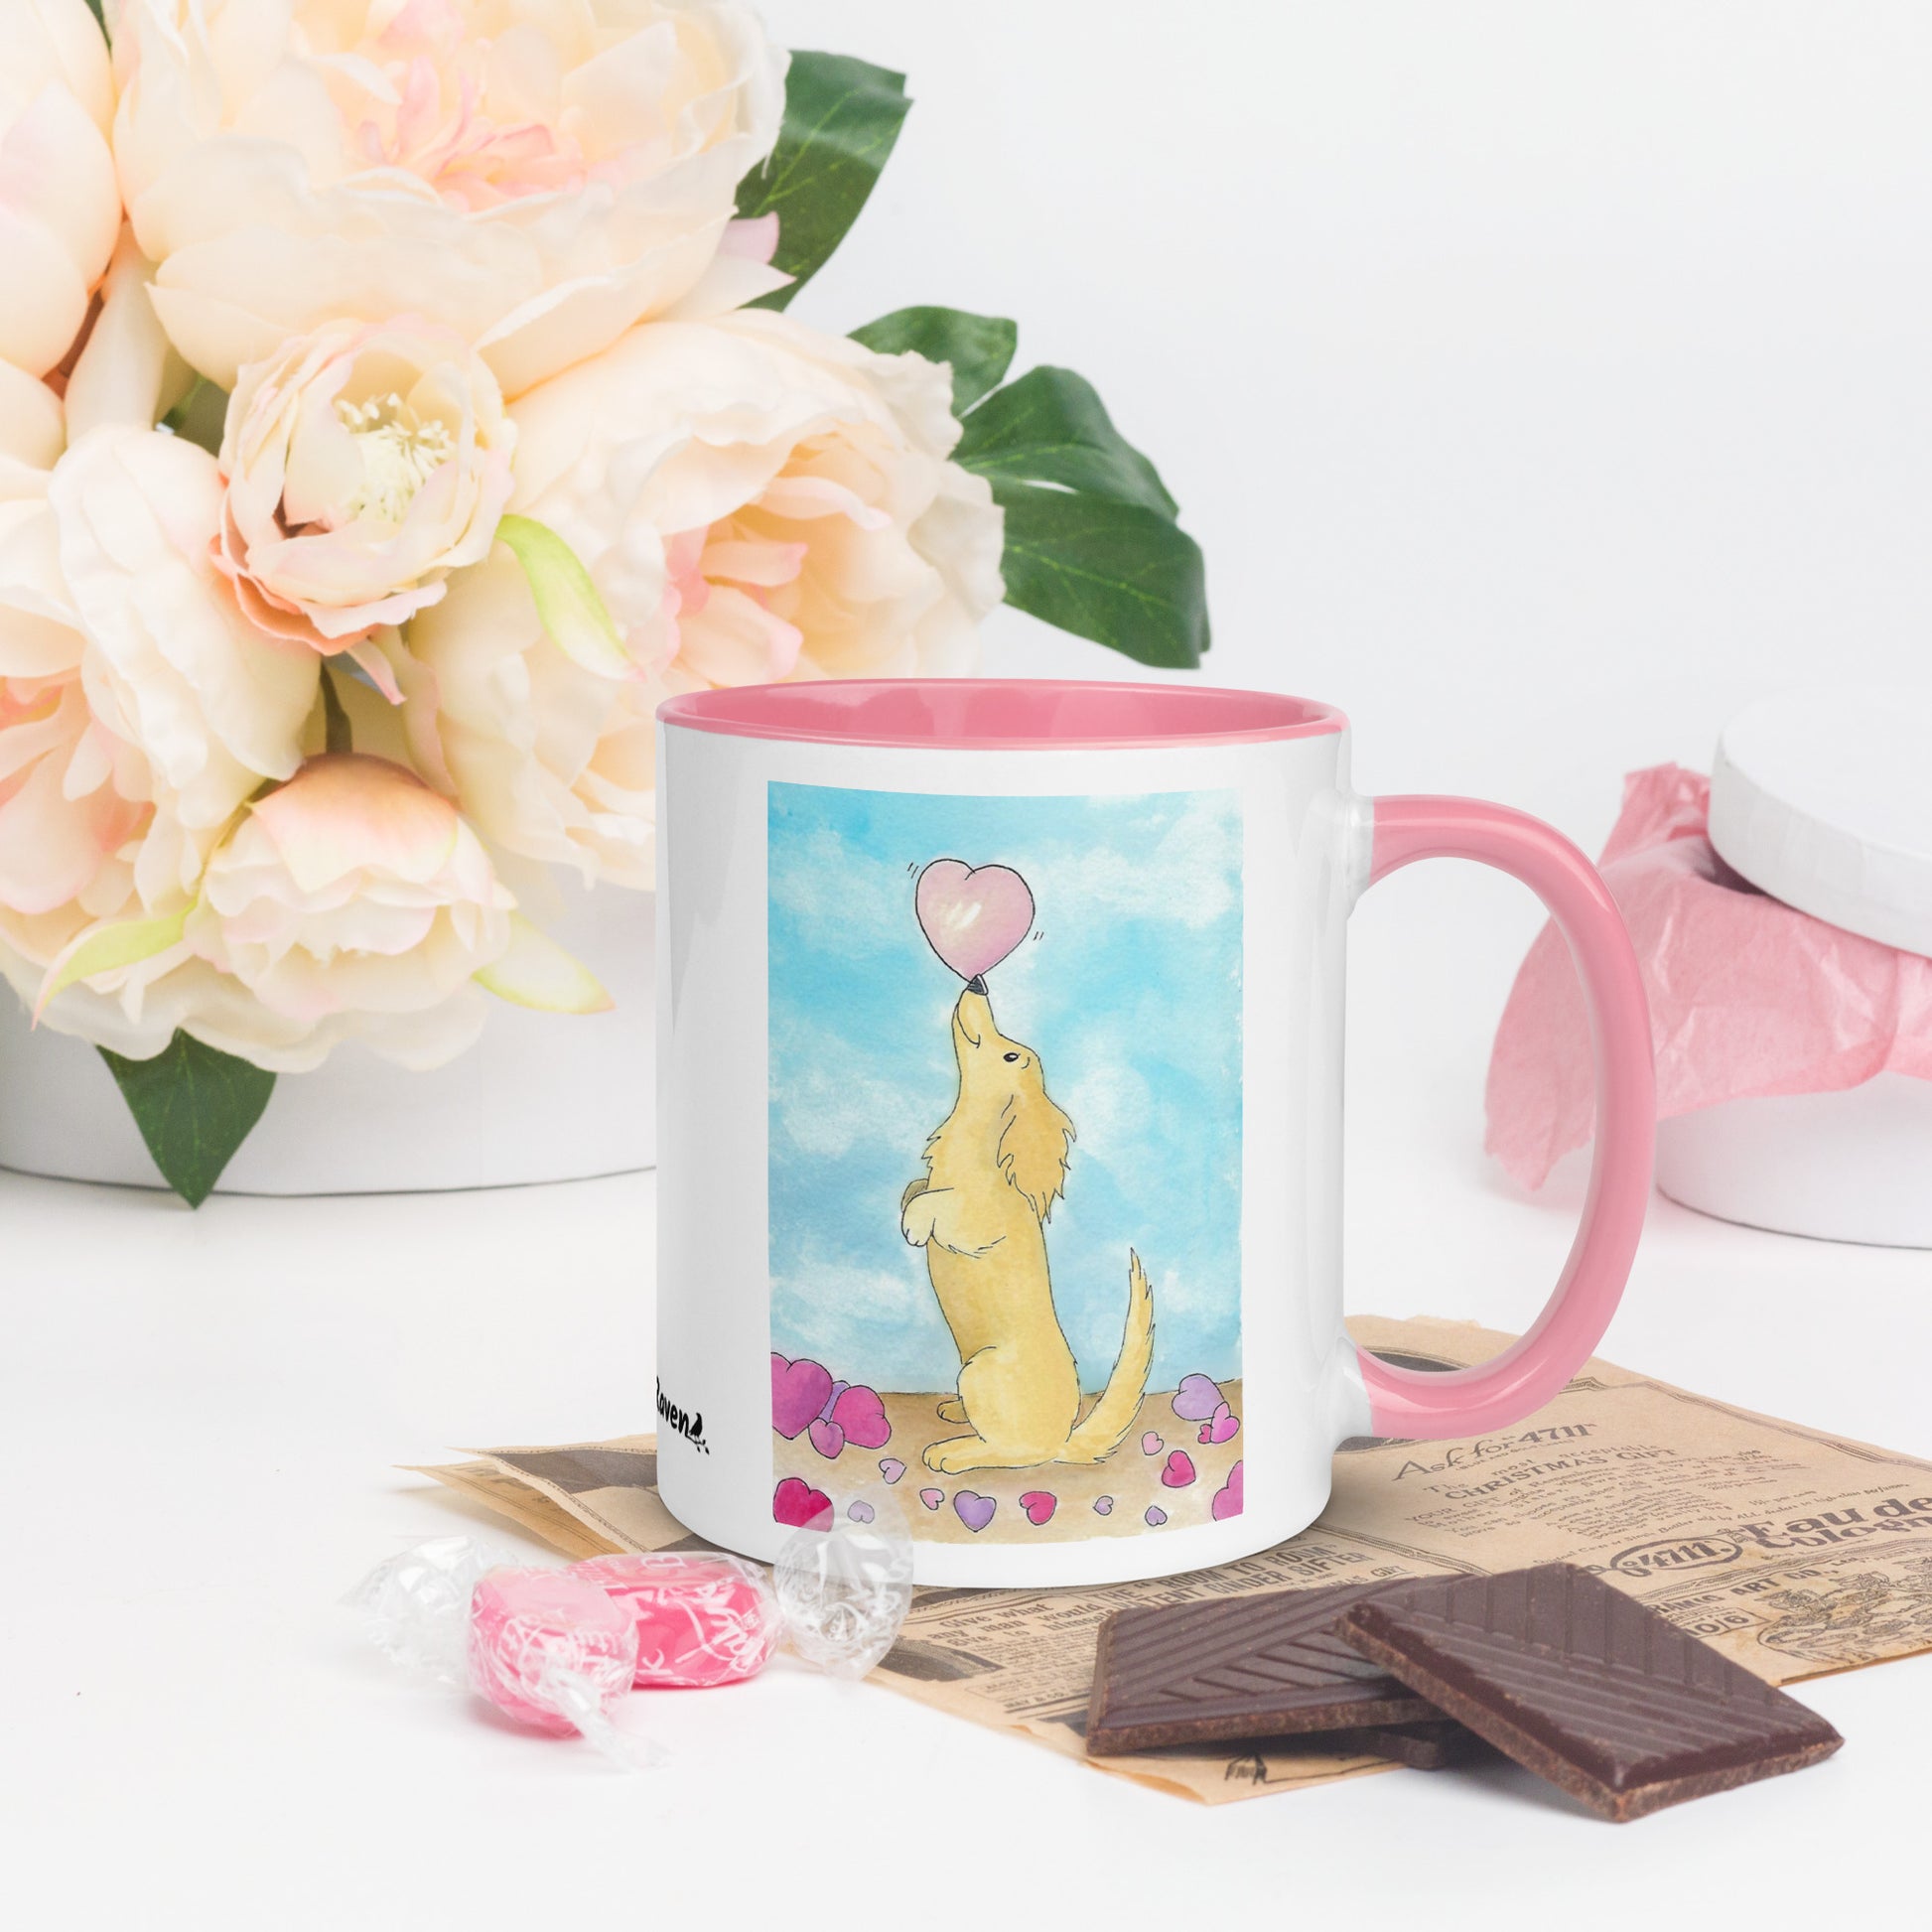 11 ounce ceramic mug featuring Puppy Love watercolor design of a dog and hearts. Double-sided print. Dishwasher and microwave safe. Pink handle, rim and inside. Shown by flowers and chocolates.